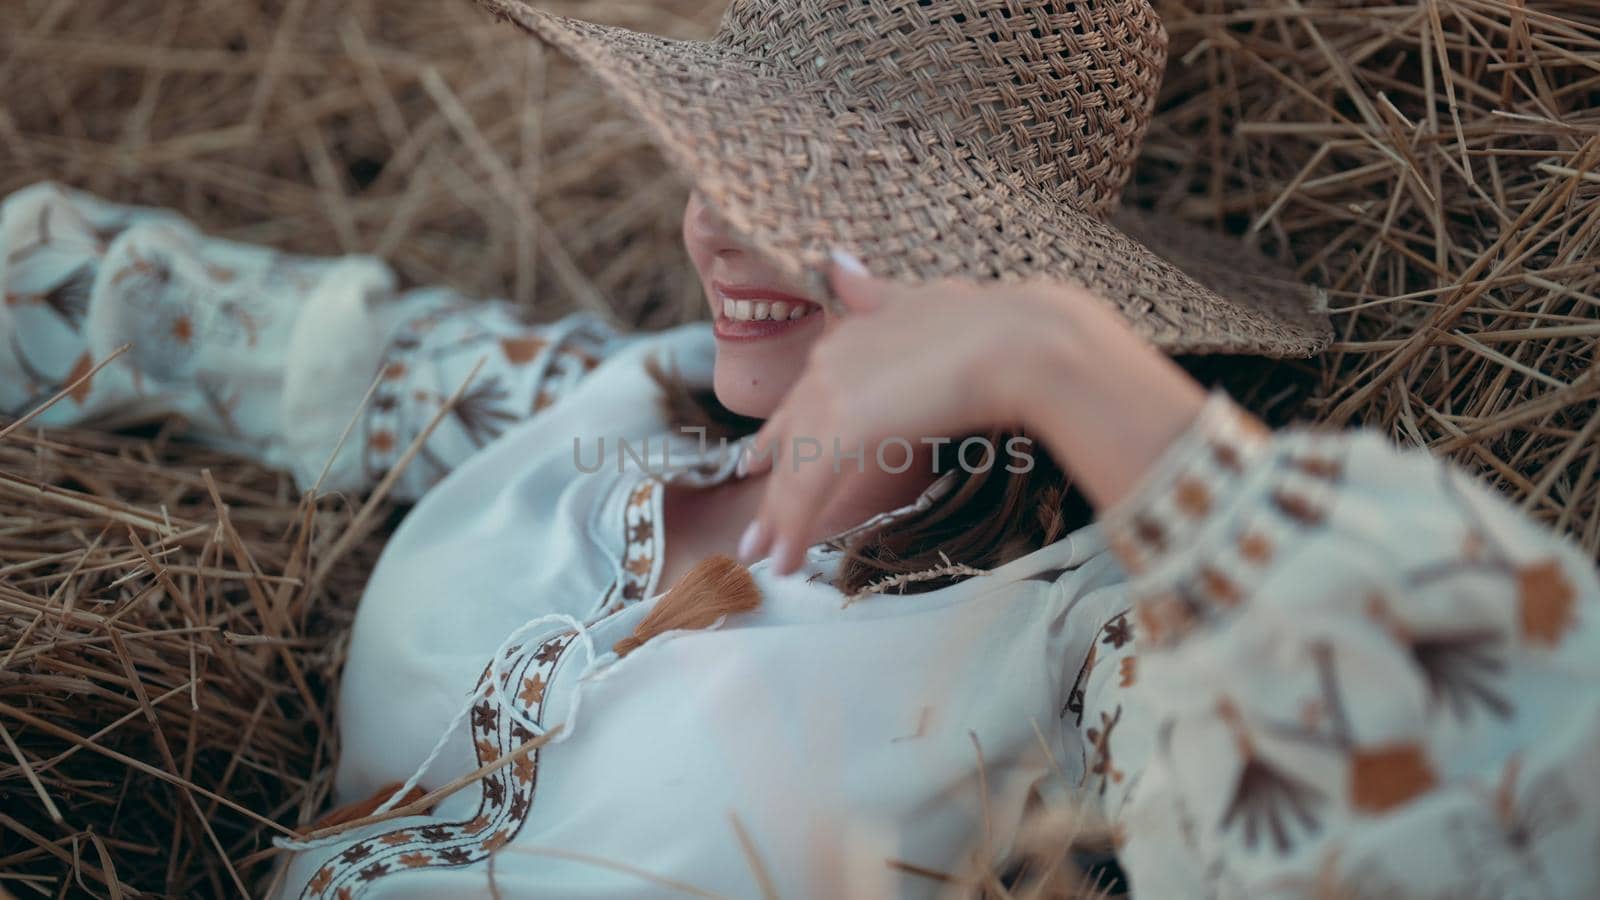 Pretty woman in straw hat and embroidered blouse smiling lying on hay in countryside at sunset. Rural nature, haystack, vacation, relax and harvest concept. High quality photo